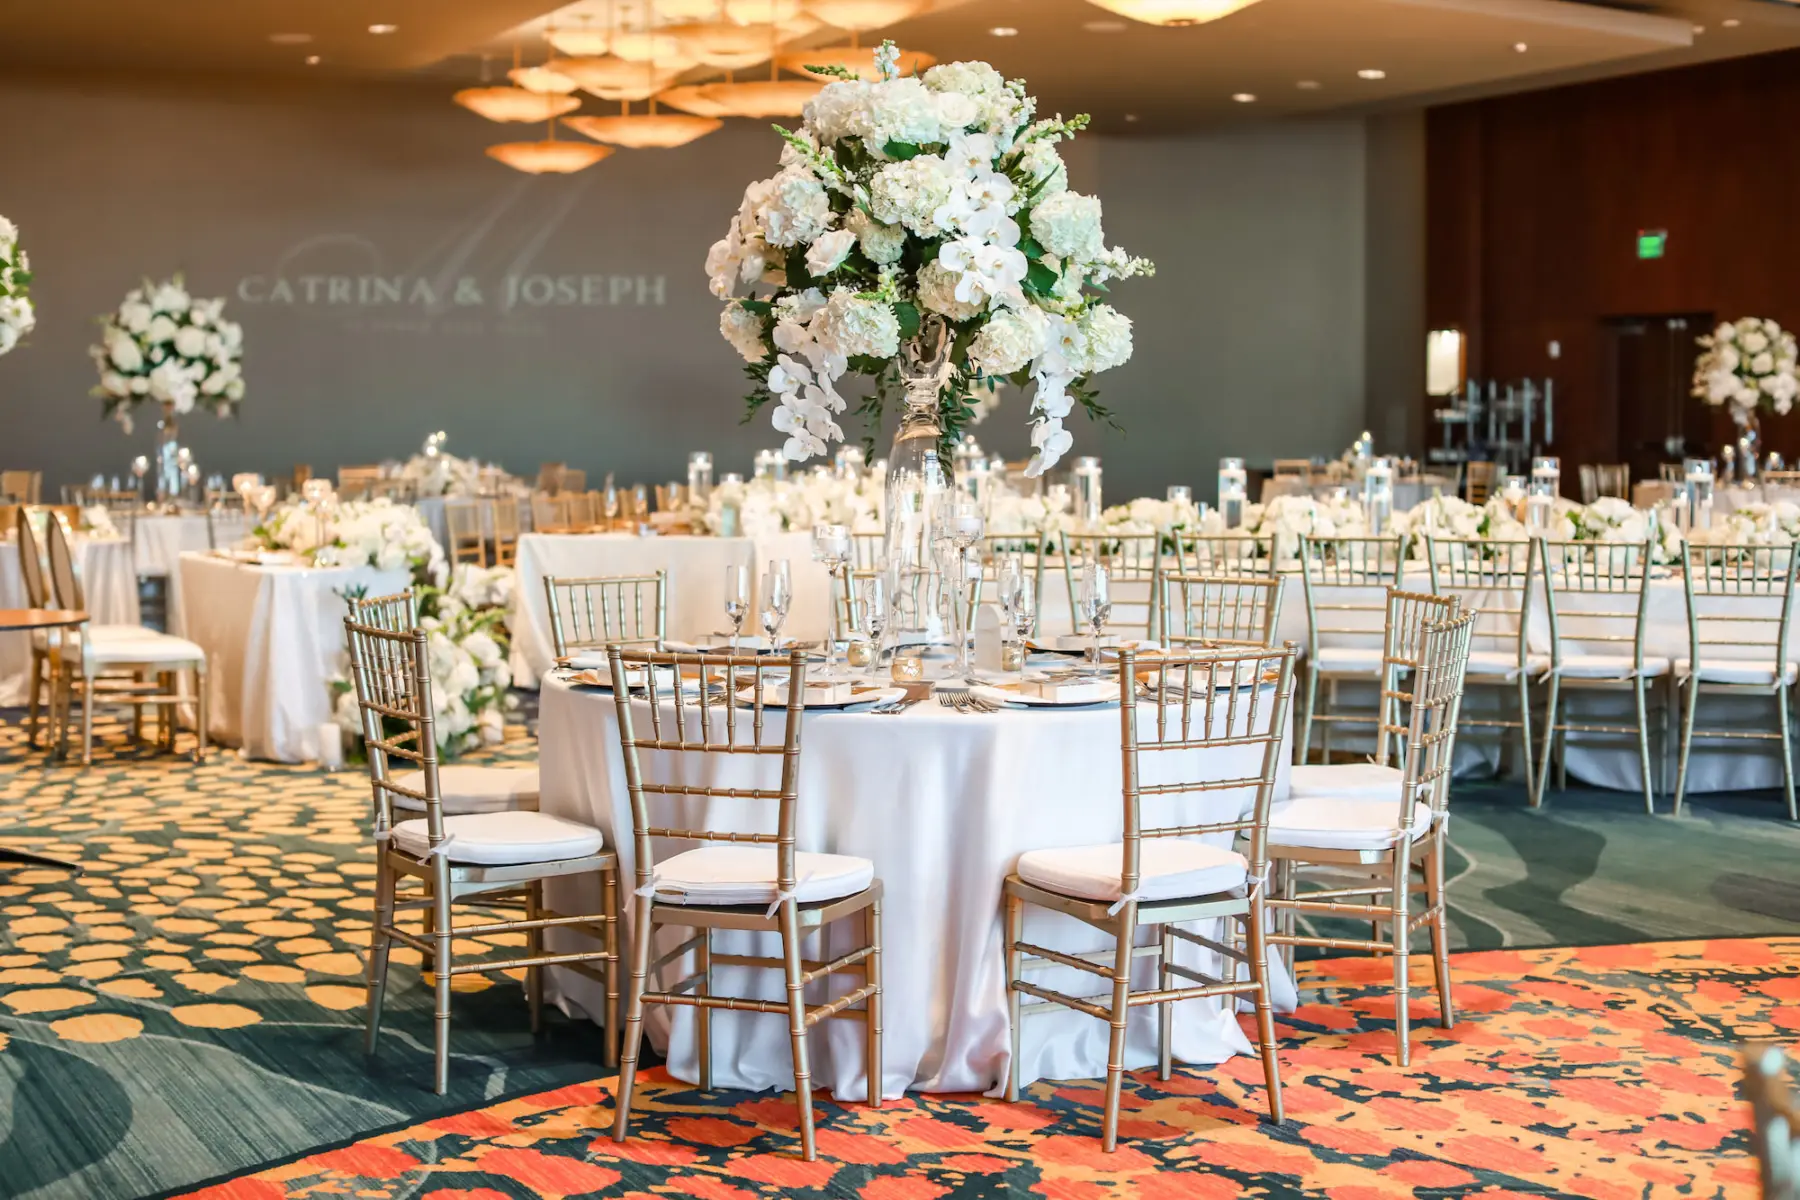 Elegant Monochromatic White and Gold Ballroom Wedding Reception Ideas | White Rose, Hydrangea, Orchid, and Greenery Decor Inspiration | Gold Chiavari Chairs | Tampa Bay Outside Of The Box Rentals | Clearwater Event Planner Breezin Weddings